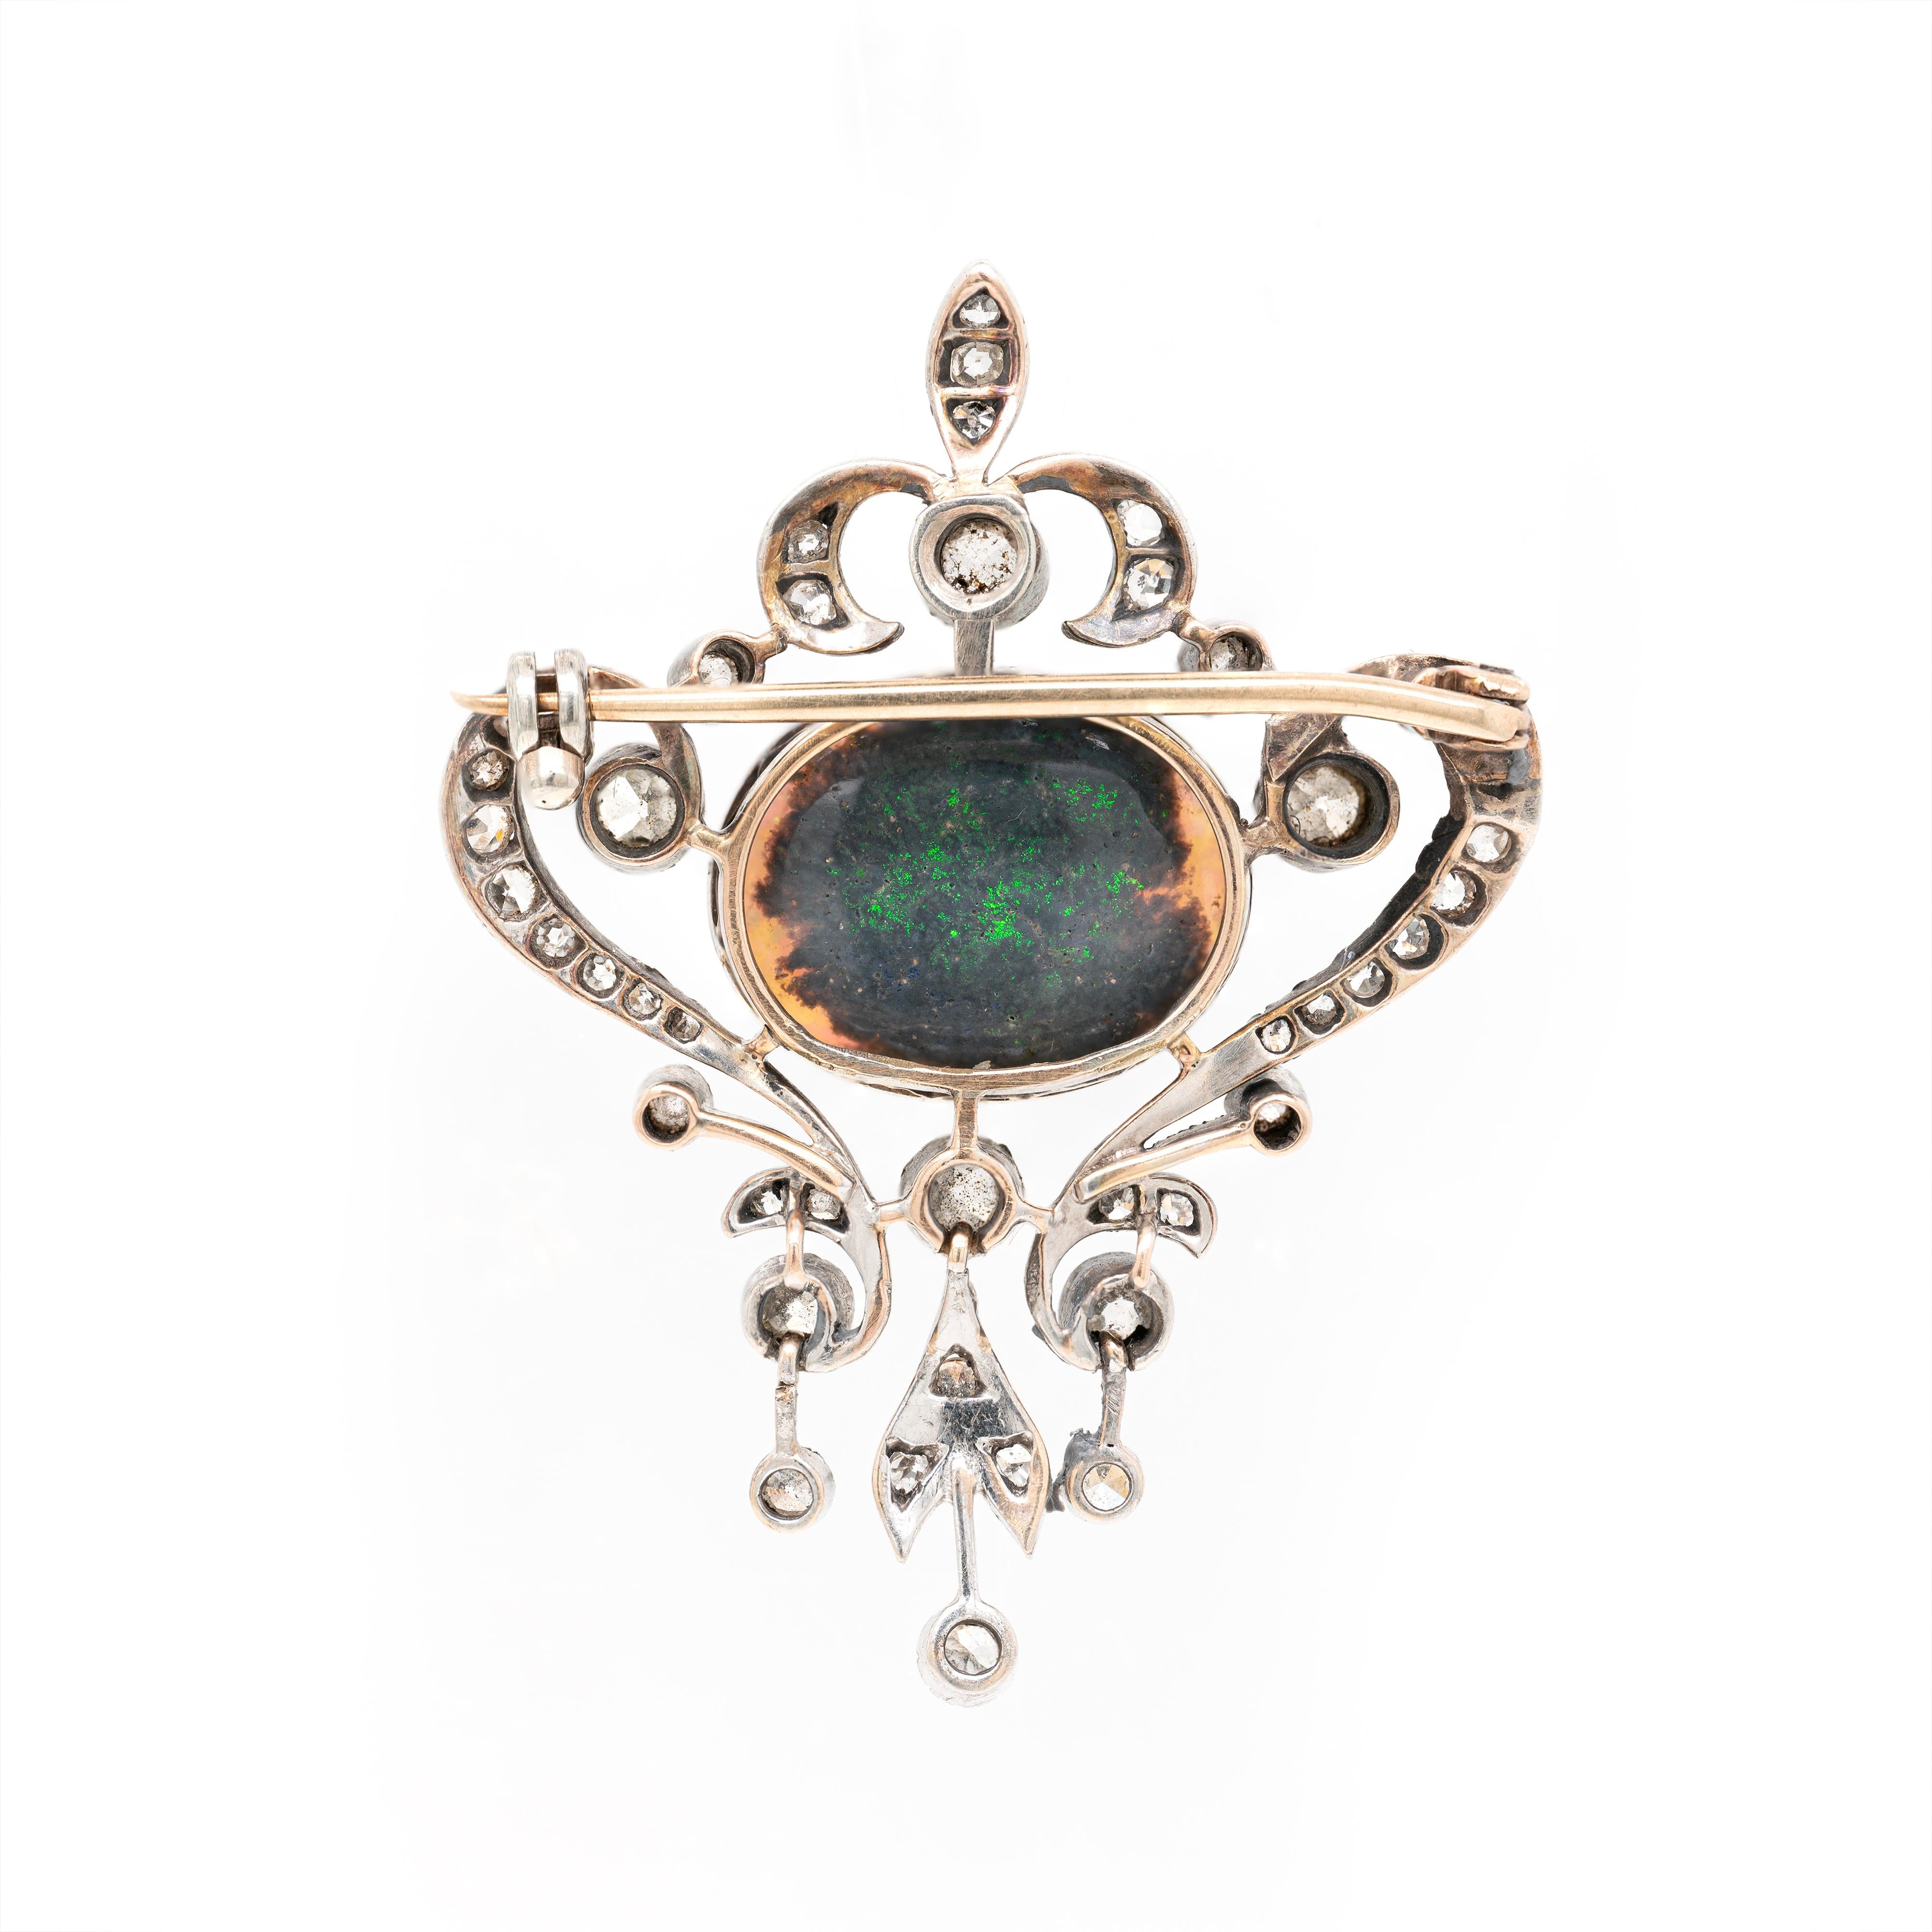 This fabulous antique brooch, masterfully designed with elegant Art Nouveau accents, features a wonderful black opal cabouchon measuring 20 x 17mm, rub-over set in the centre in an 18 carat yellow gold open back mount. The spectacular opal is